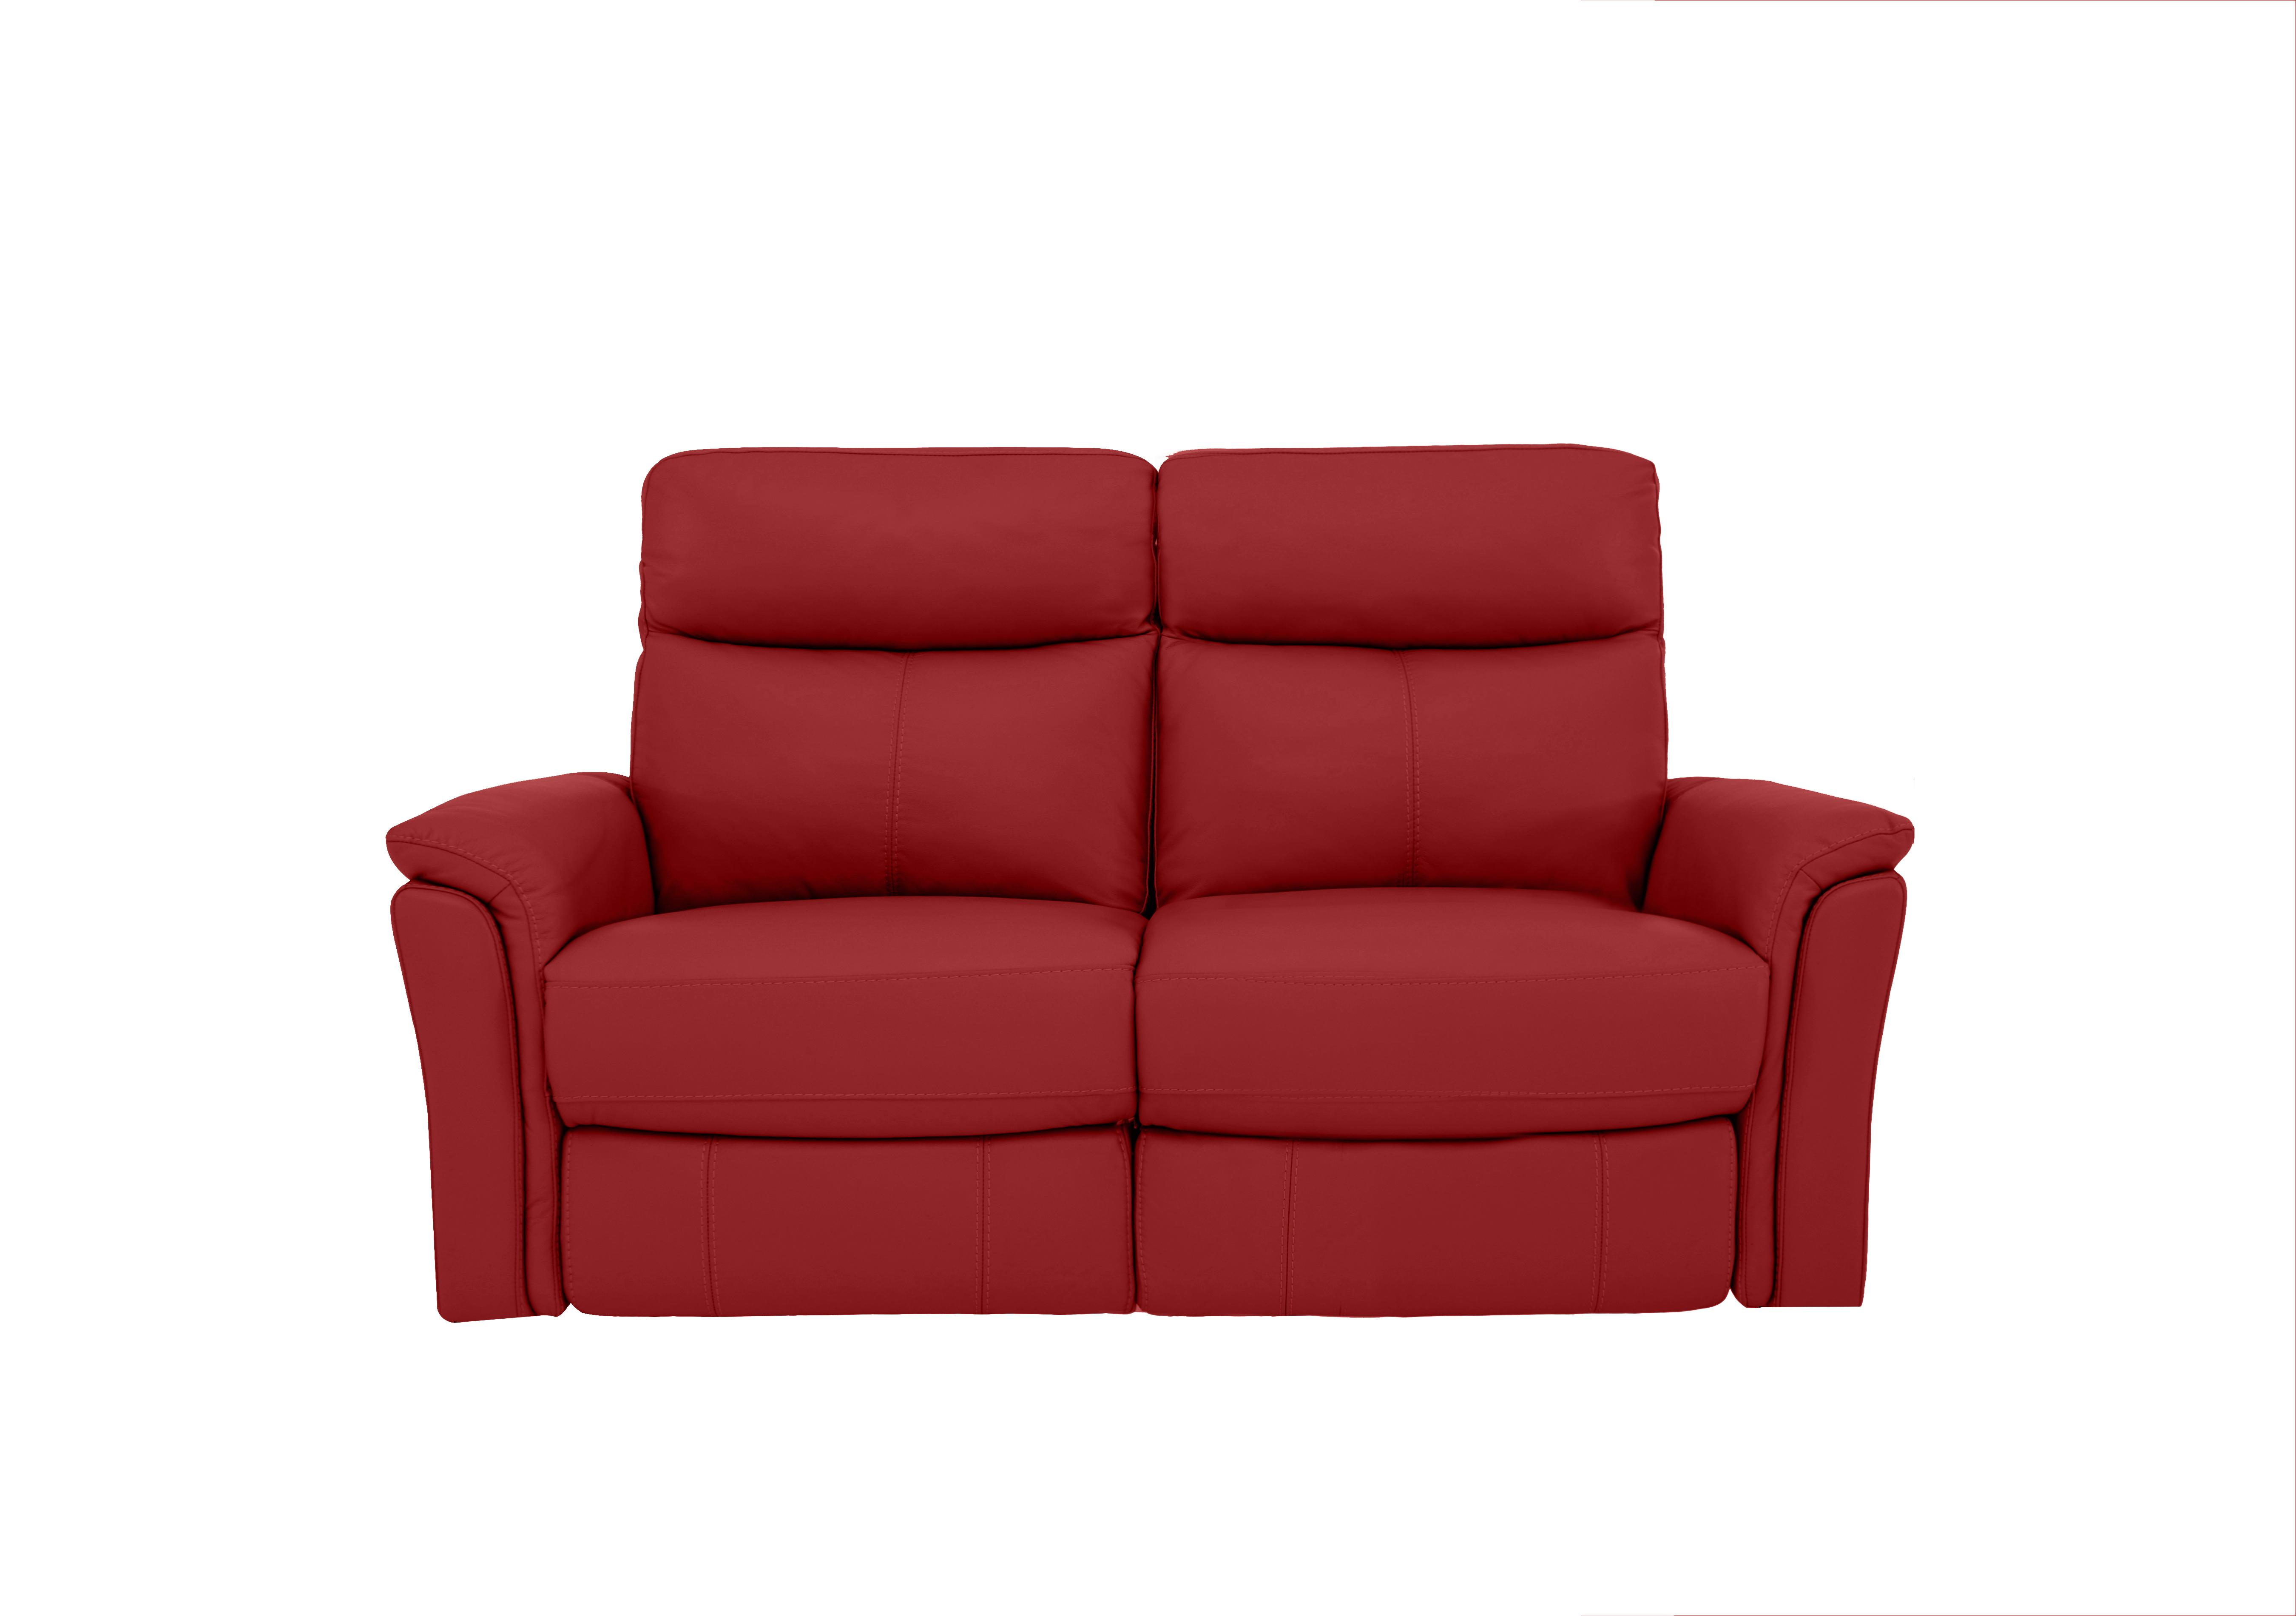 Compact Collection Piccolo 2 Seater Sofa in Bv-0008 Pure Red on Furniture Village